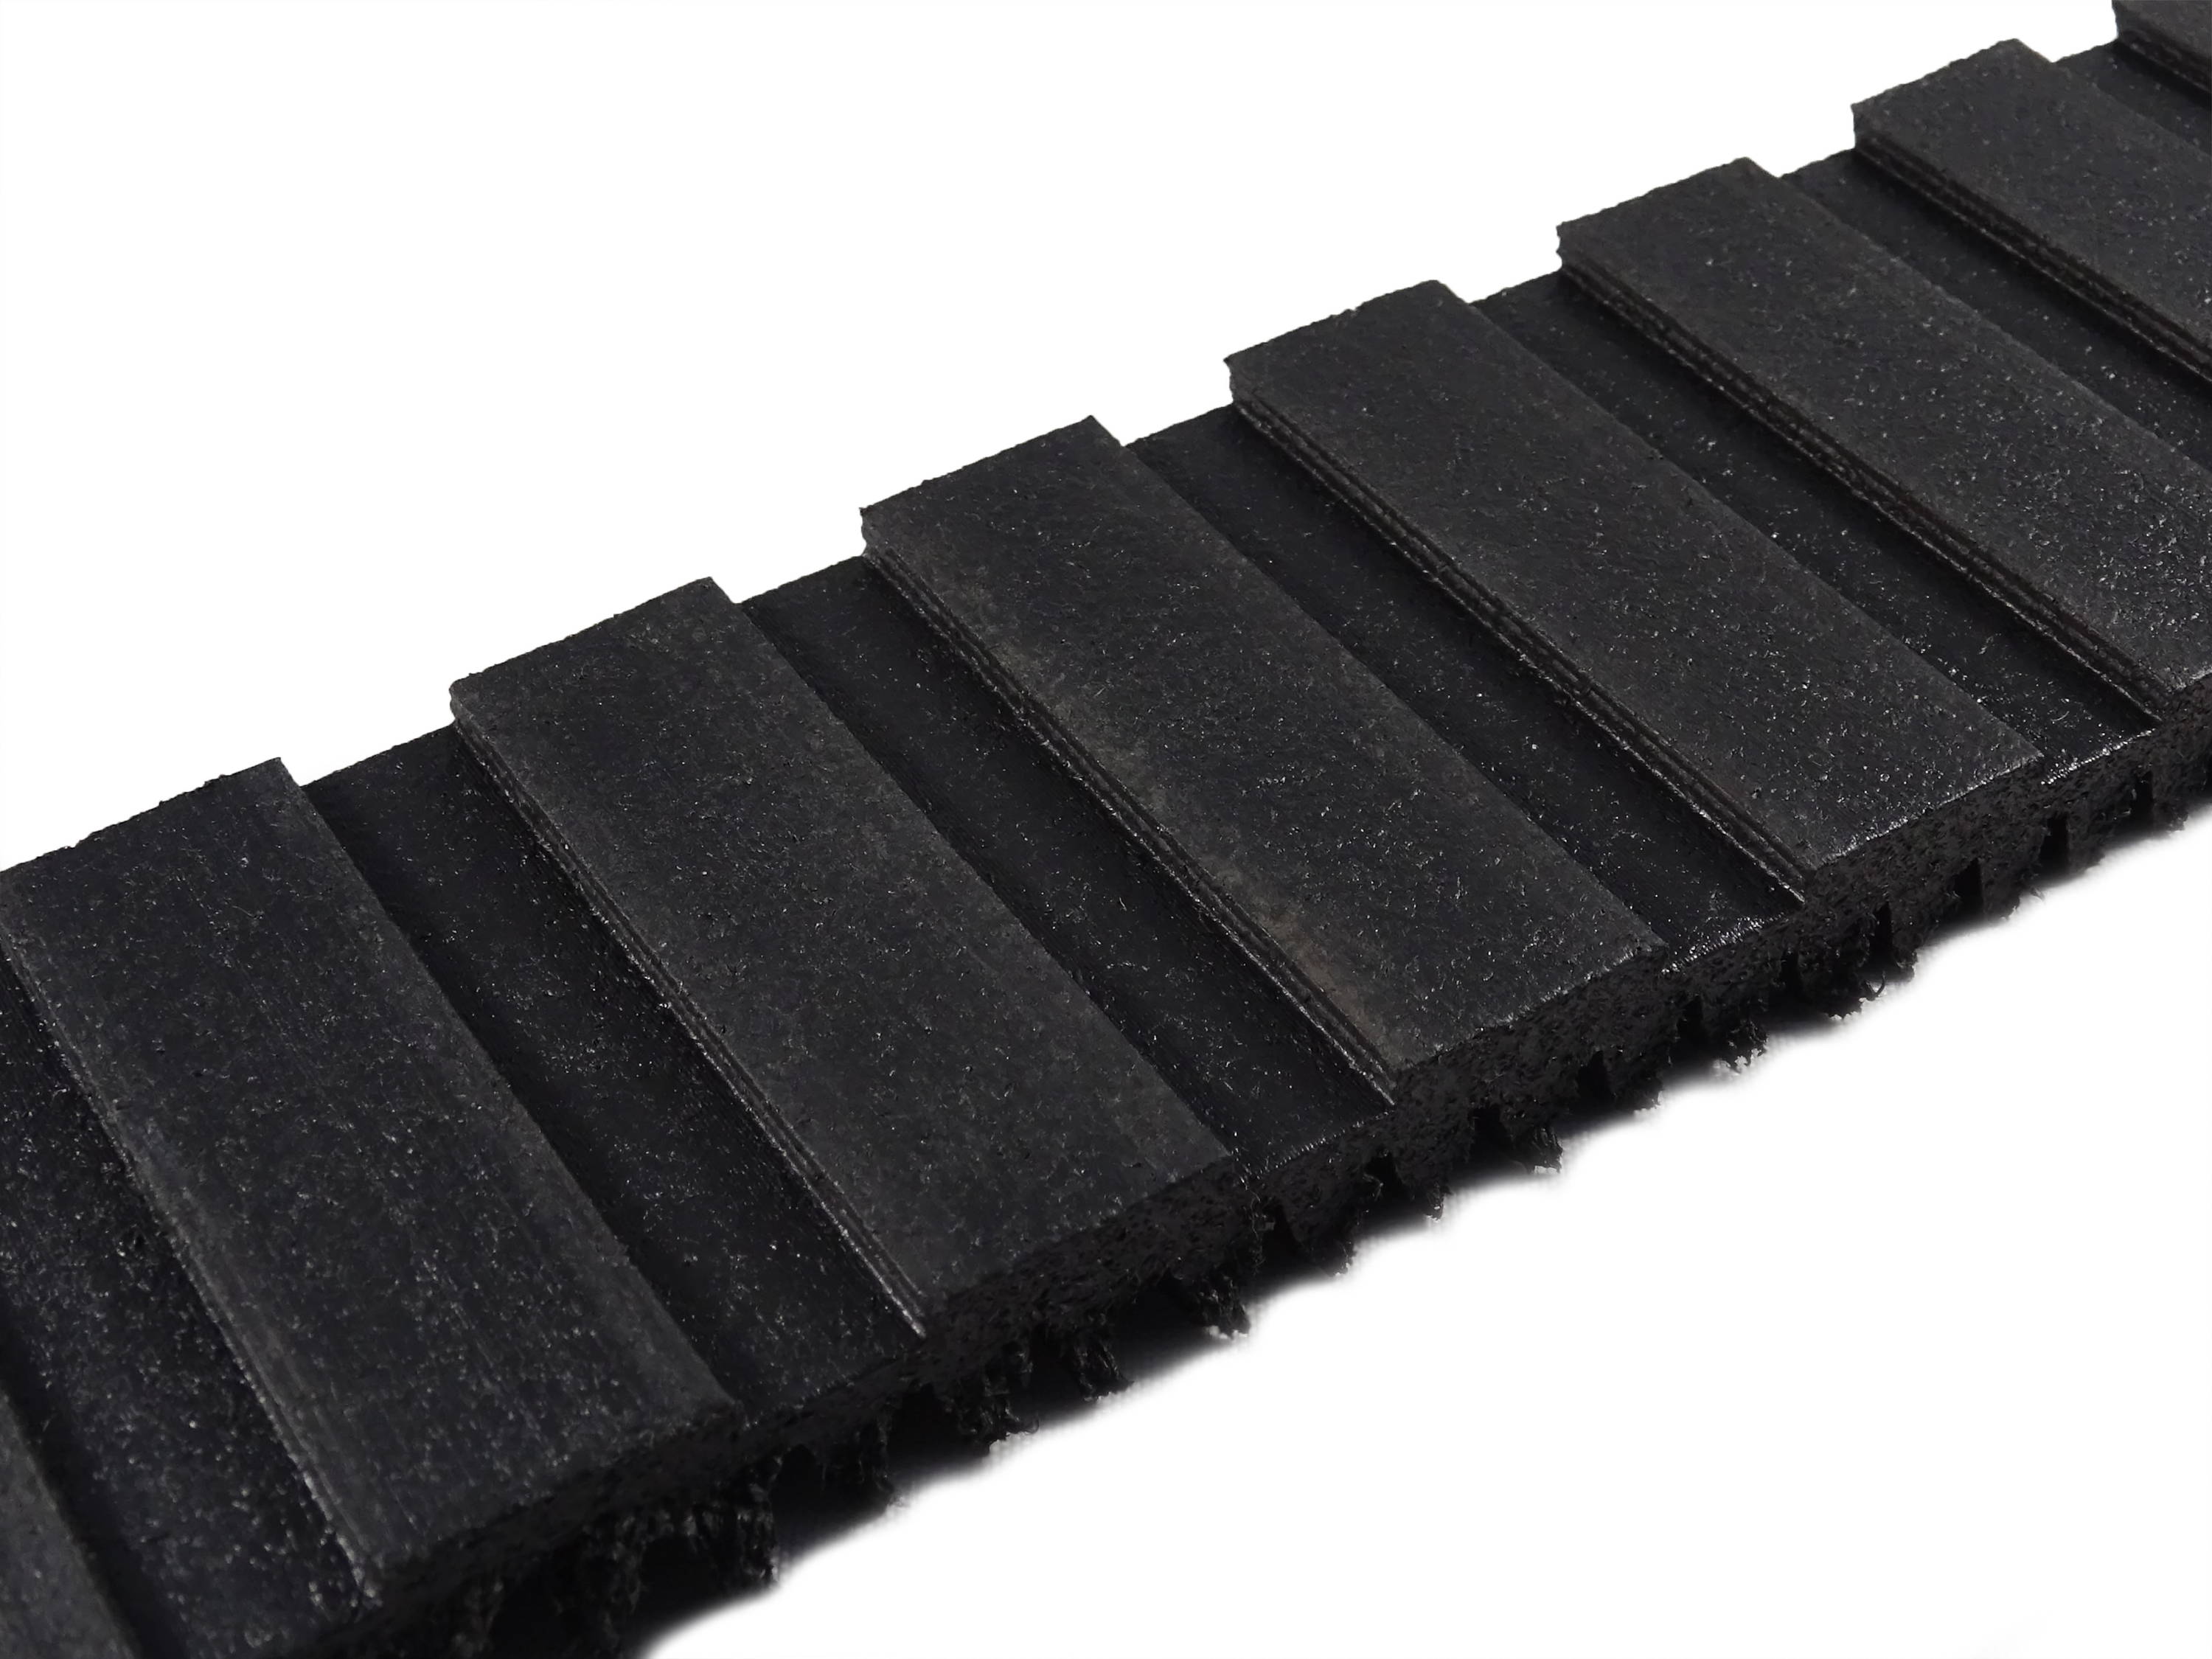 Sample of recycled rubber